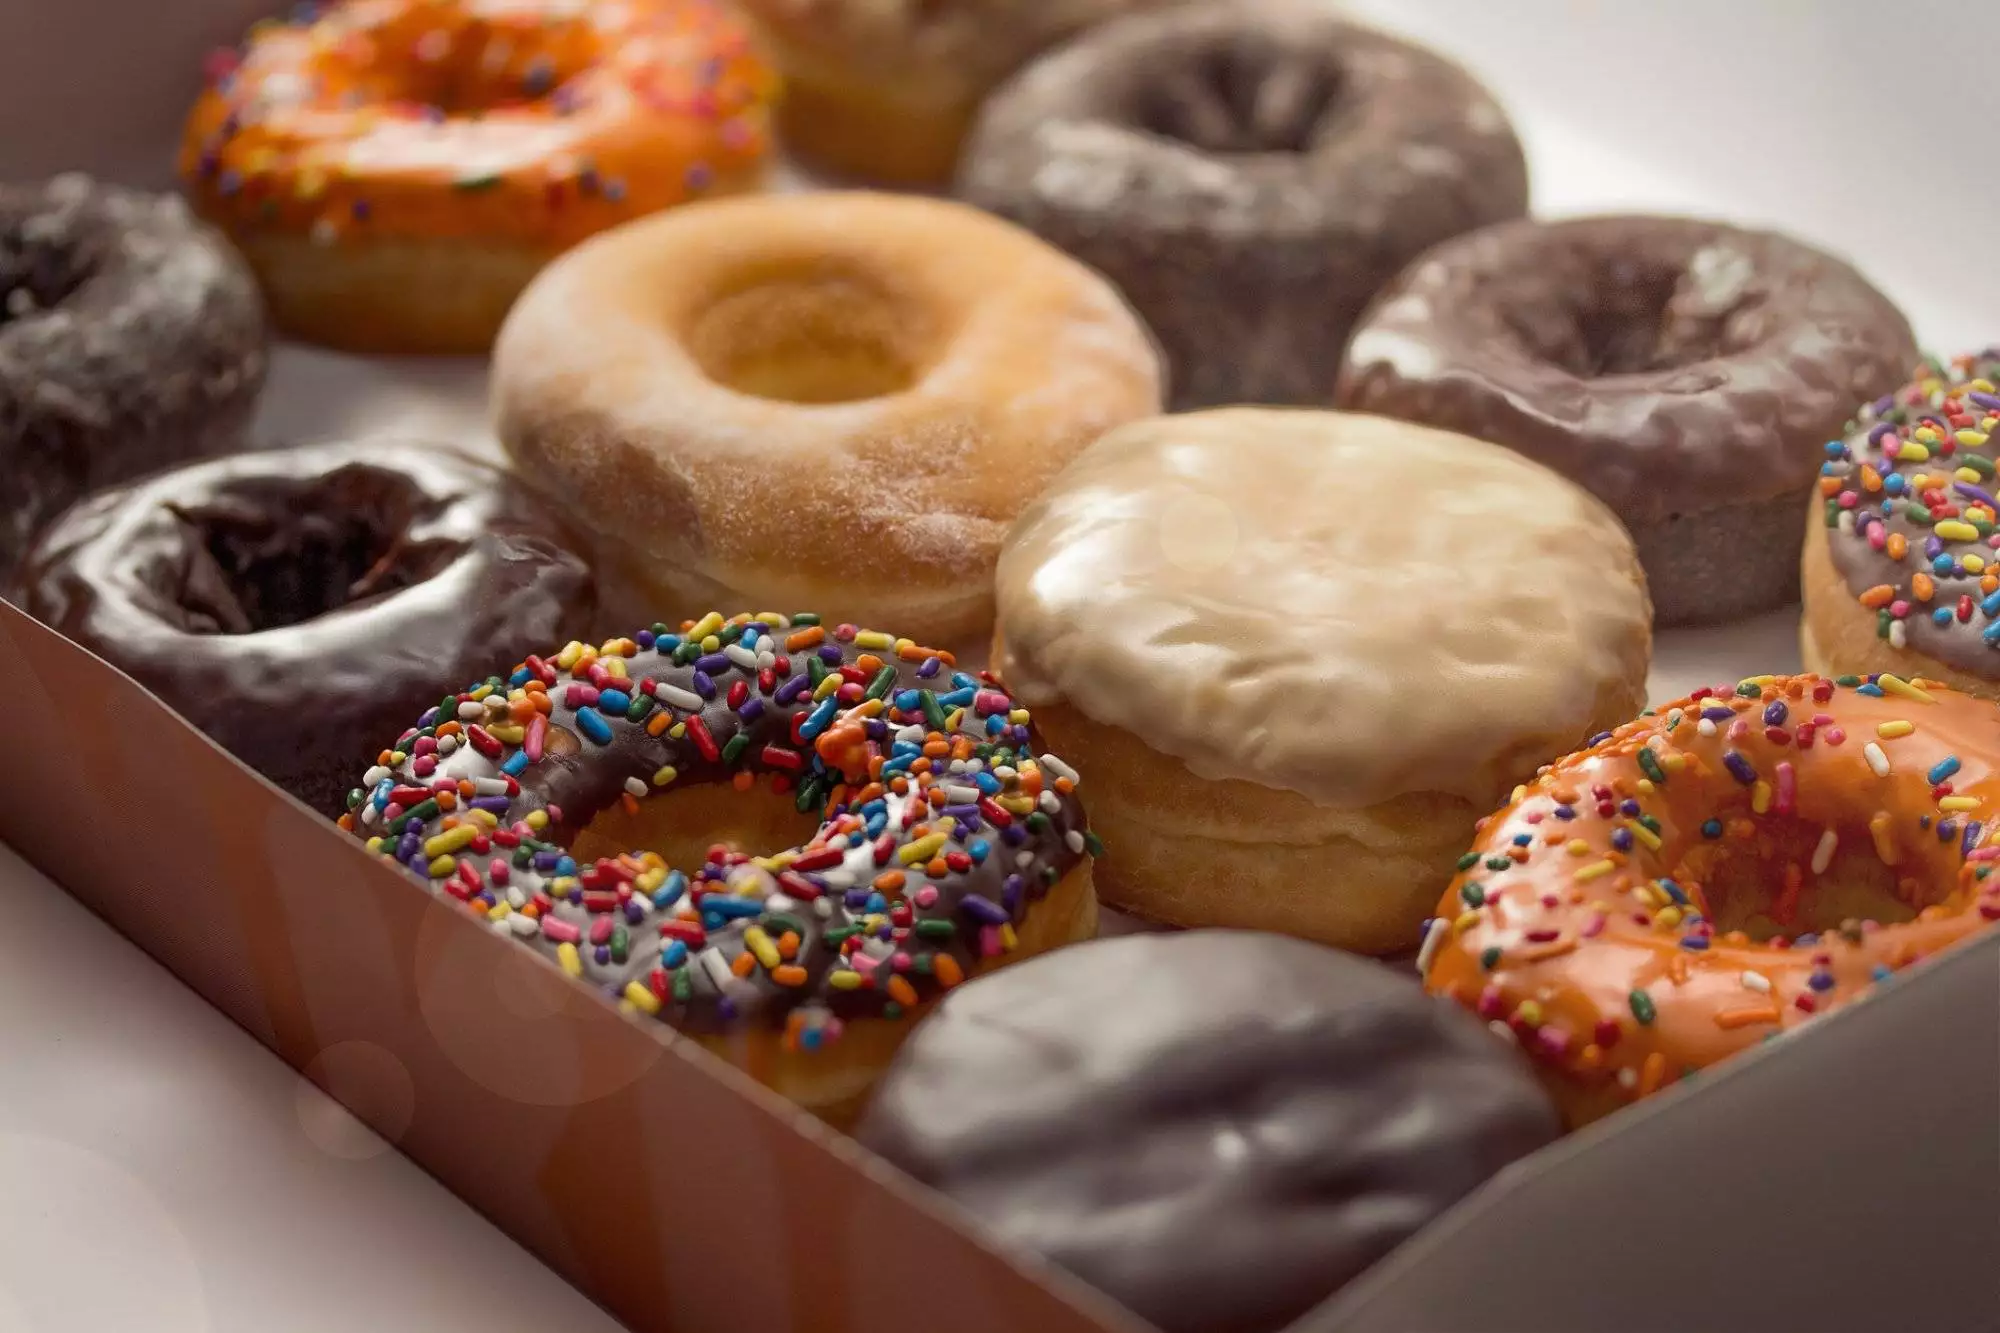 Discover Delicious Donut Delights at This Carrollton Donut Shop